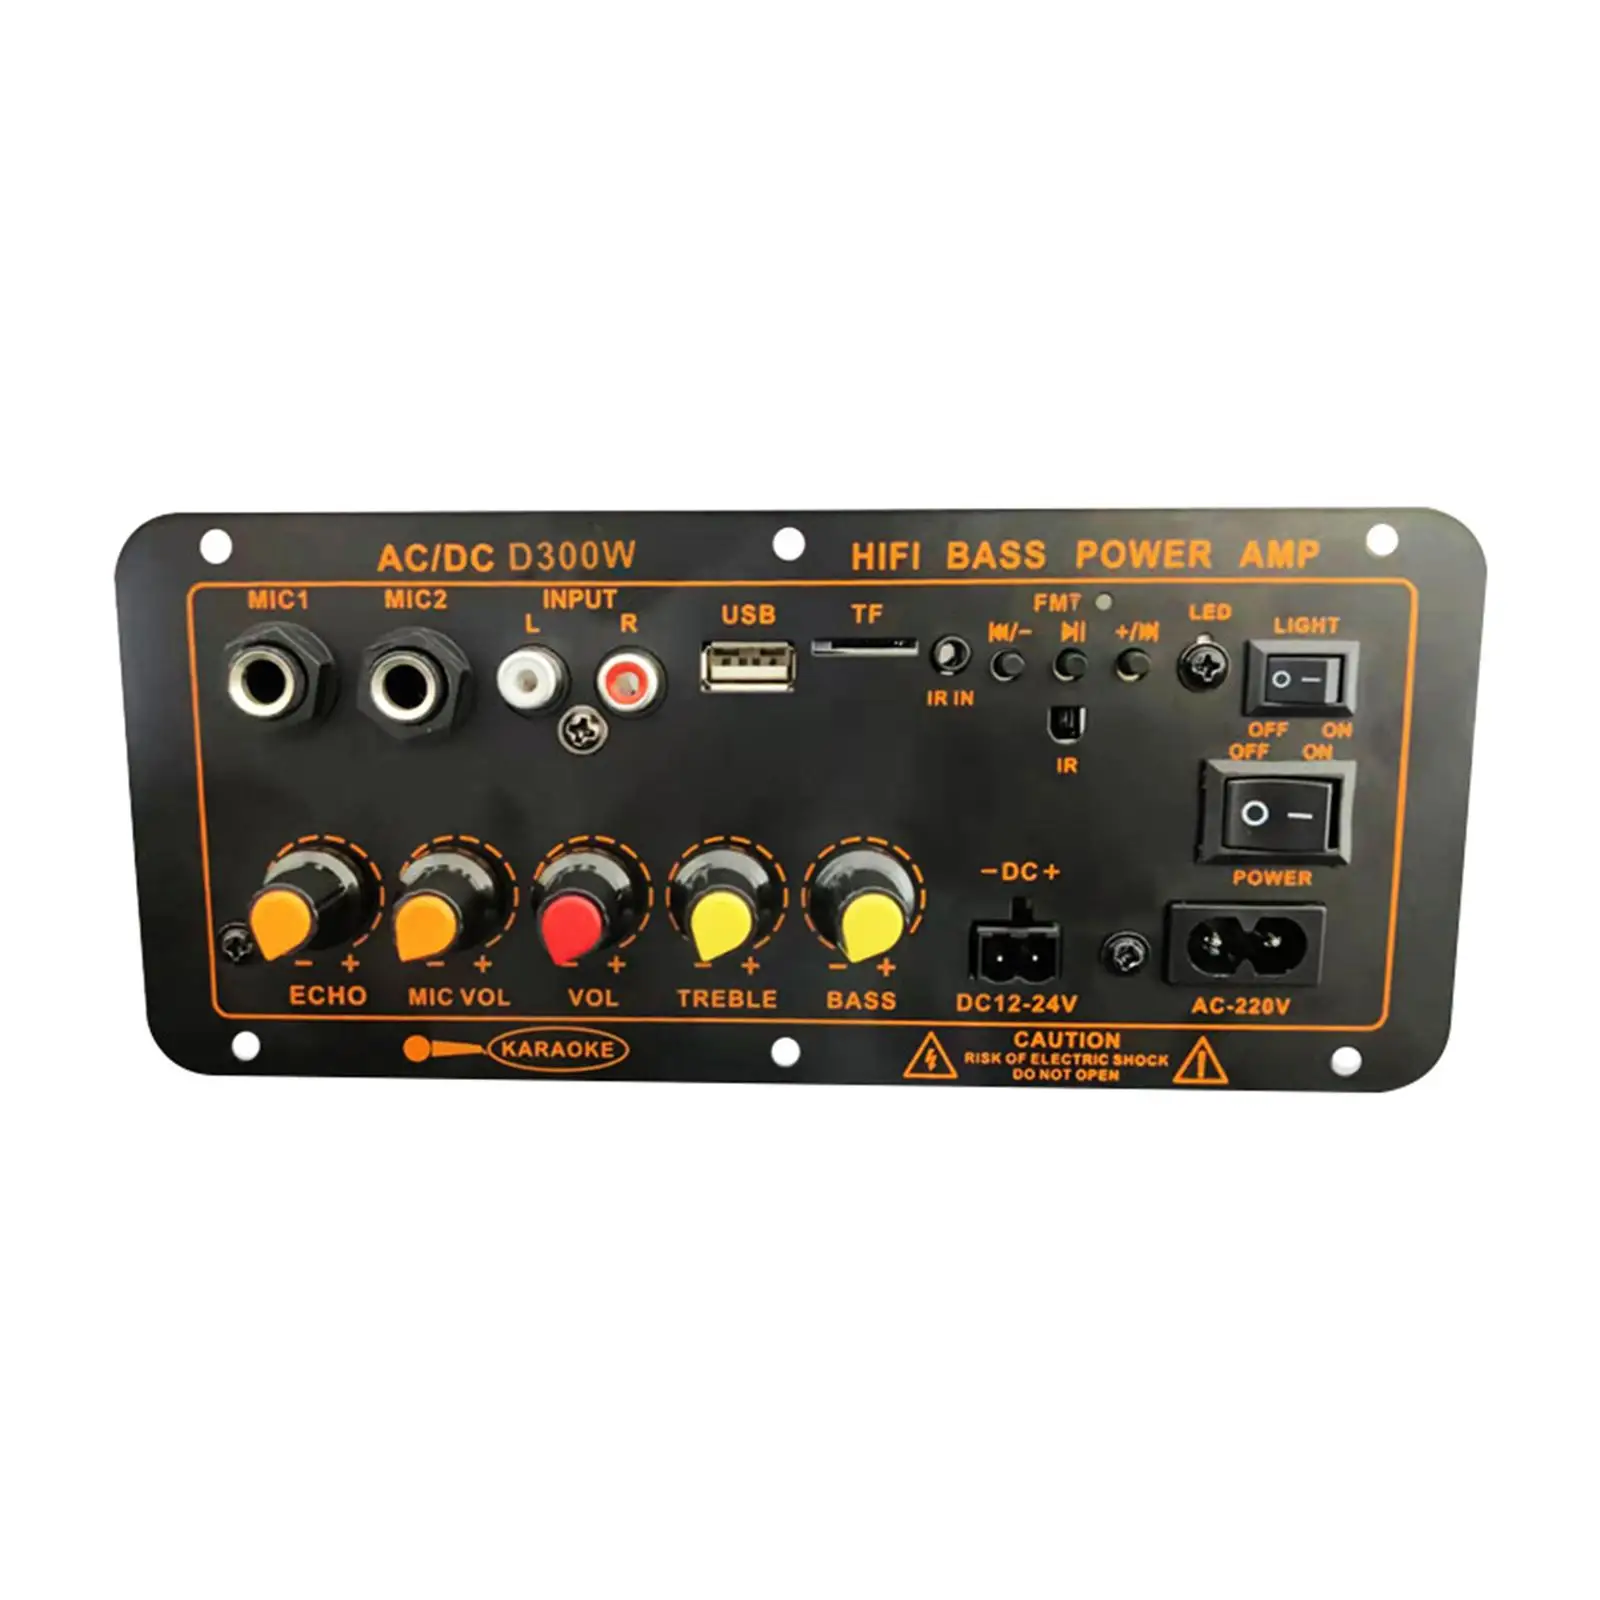 300W Bluetooth High Power Stereo Amplifier Board EU 220V Sturdy Powerful Function Easily Install with Knobs Subwoofer Amplifier